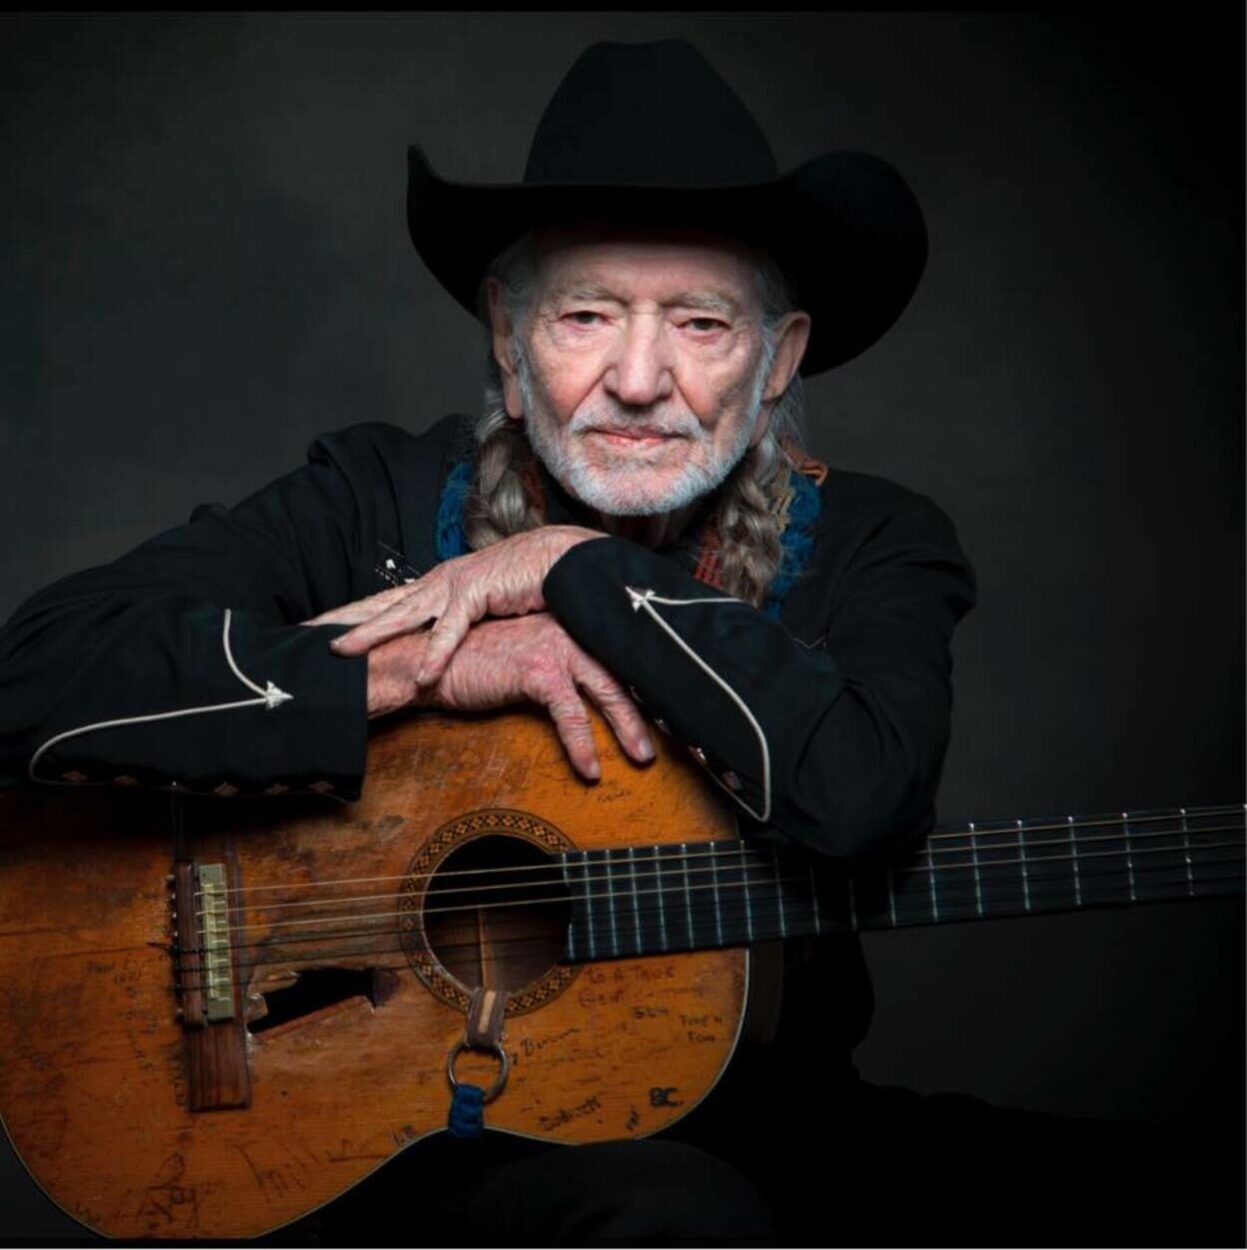 Willie Nelson holding a guitar